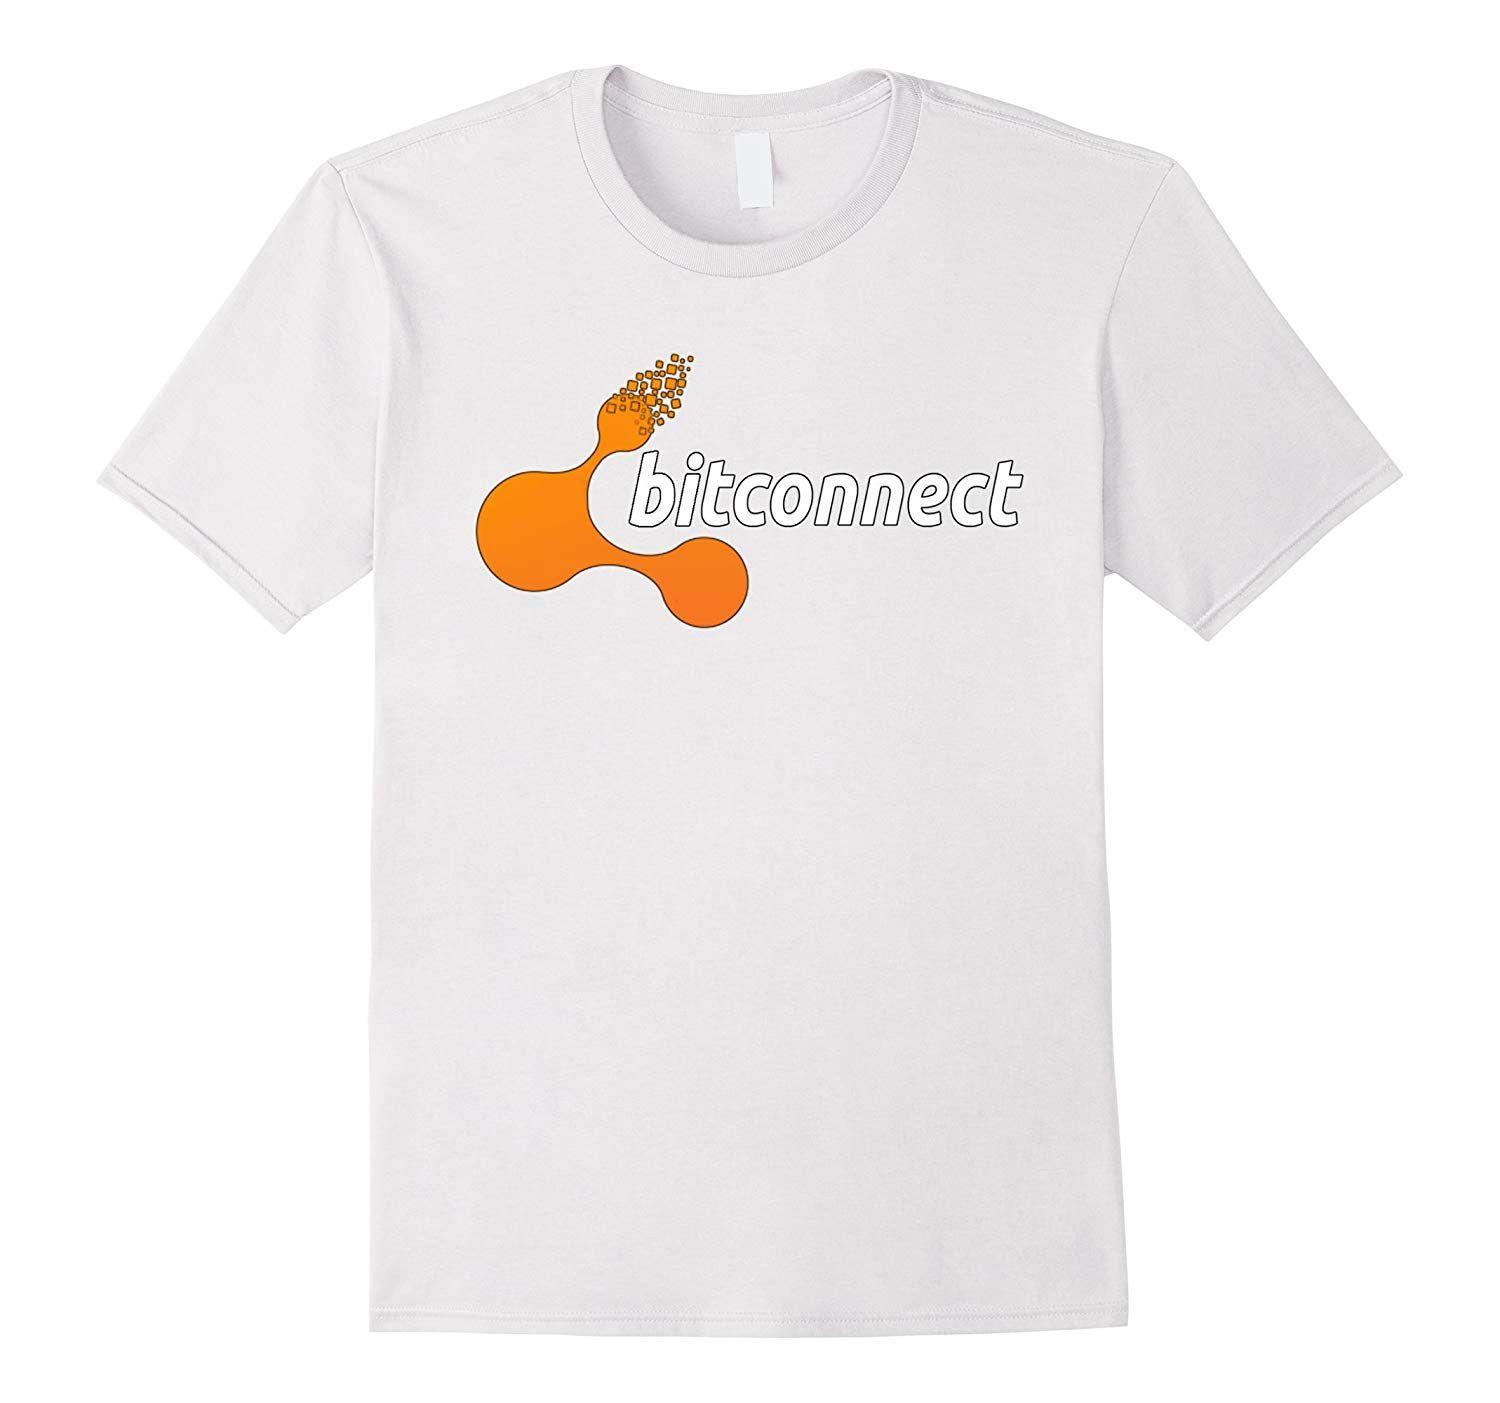 Bitconnect Logo - New Bitconnect Logo for 2017 Cryptocurrency T-shirt-ANZ - Anztshirt